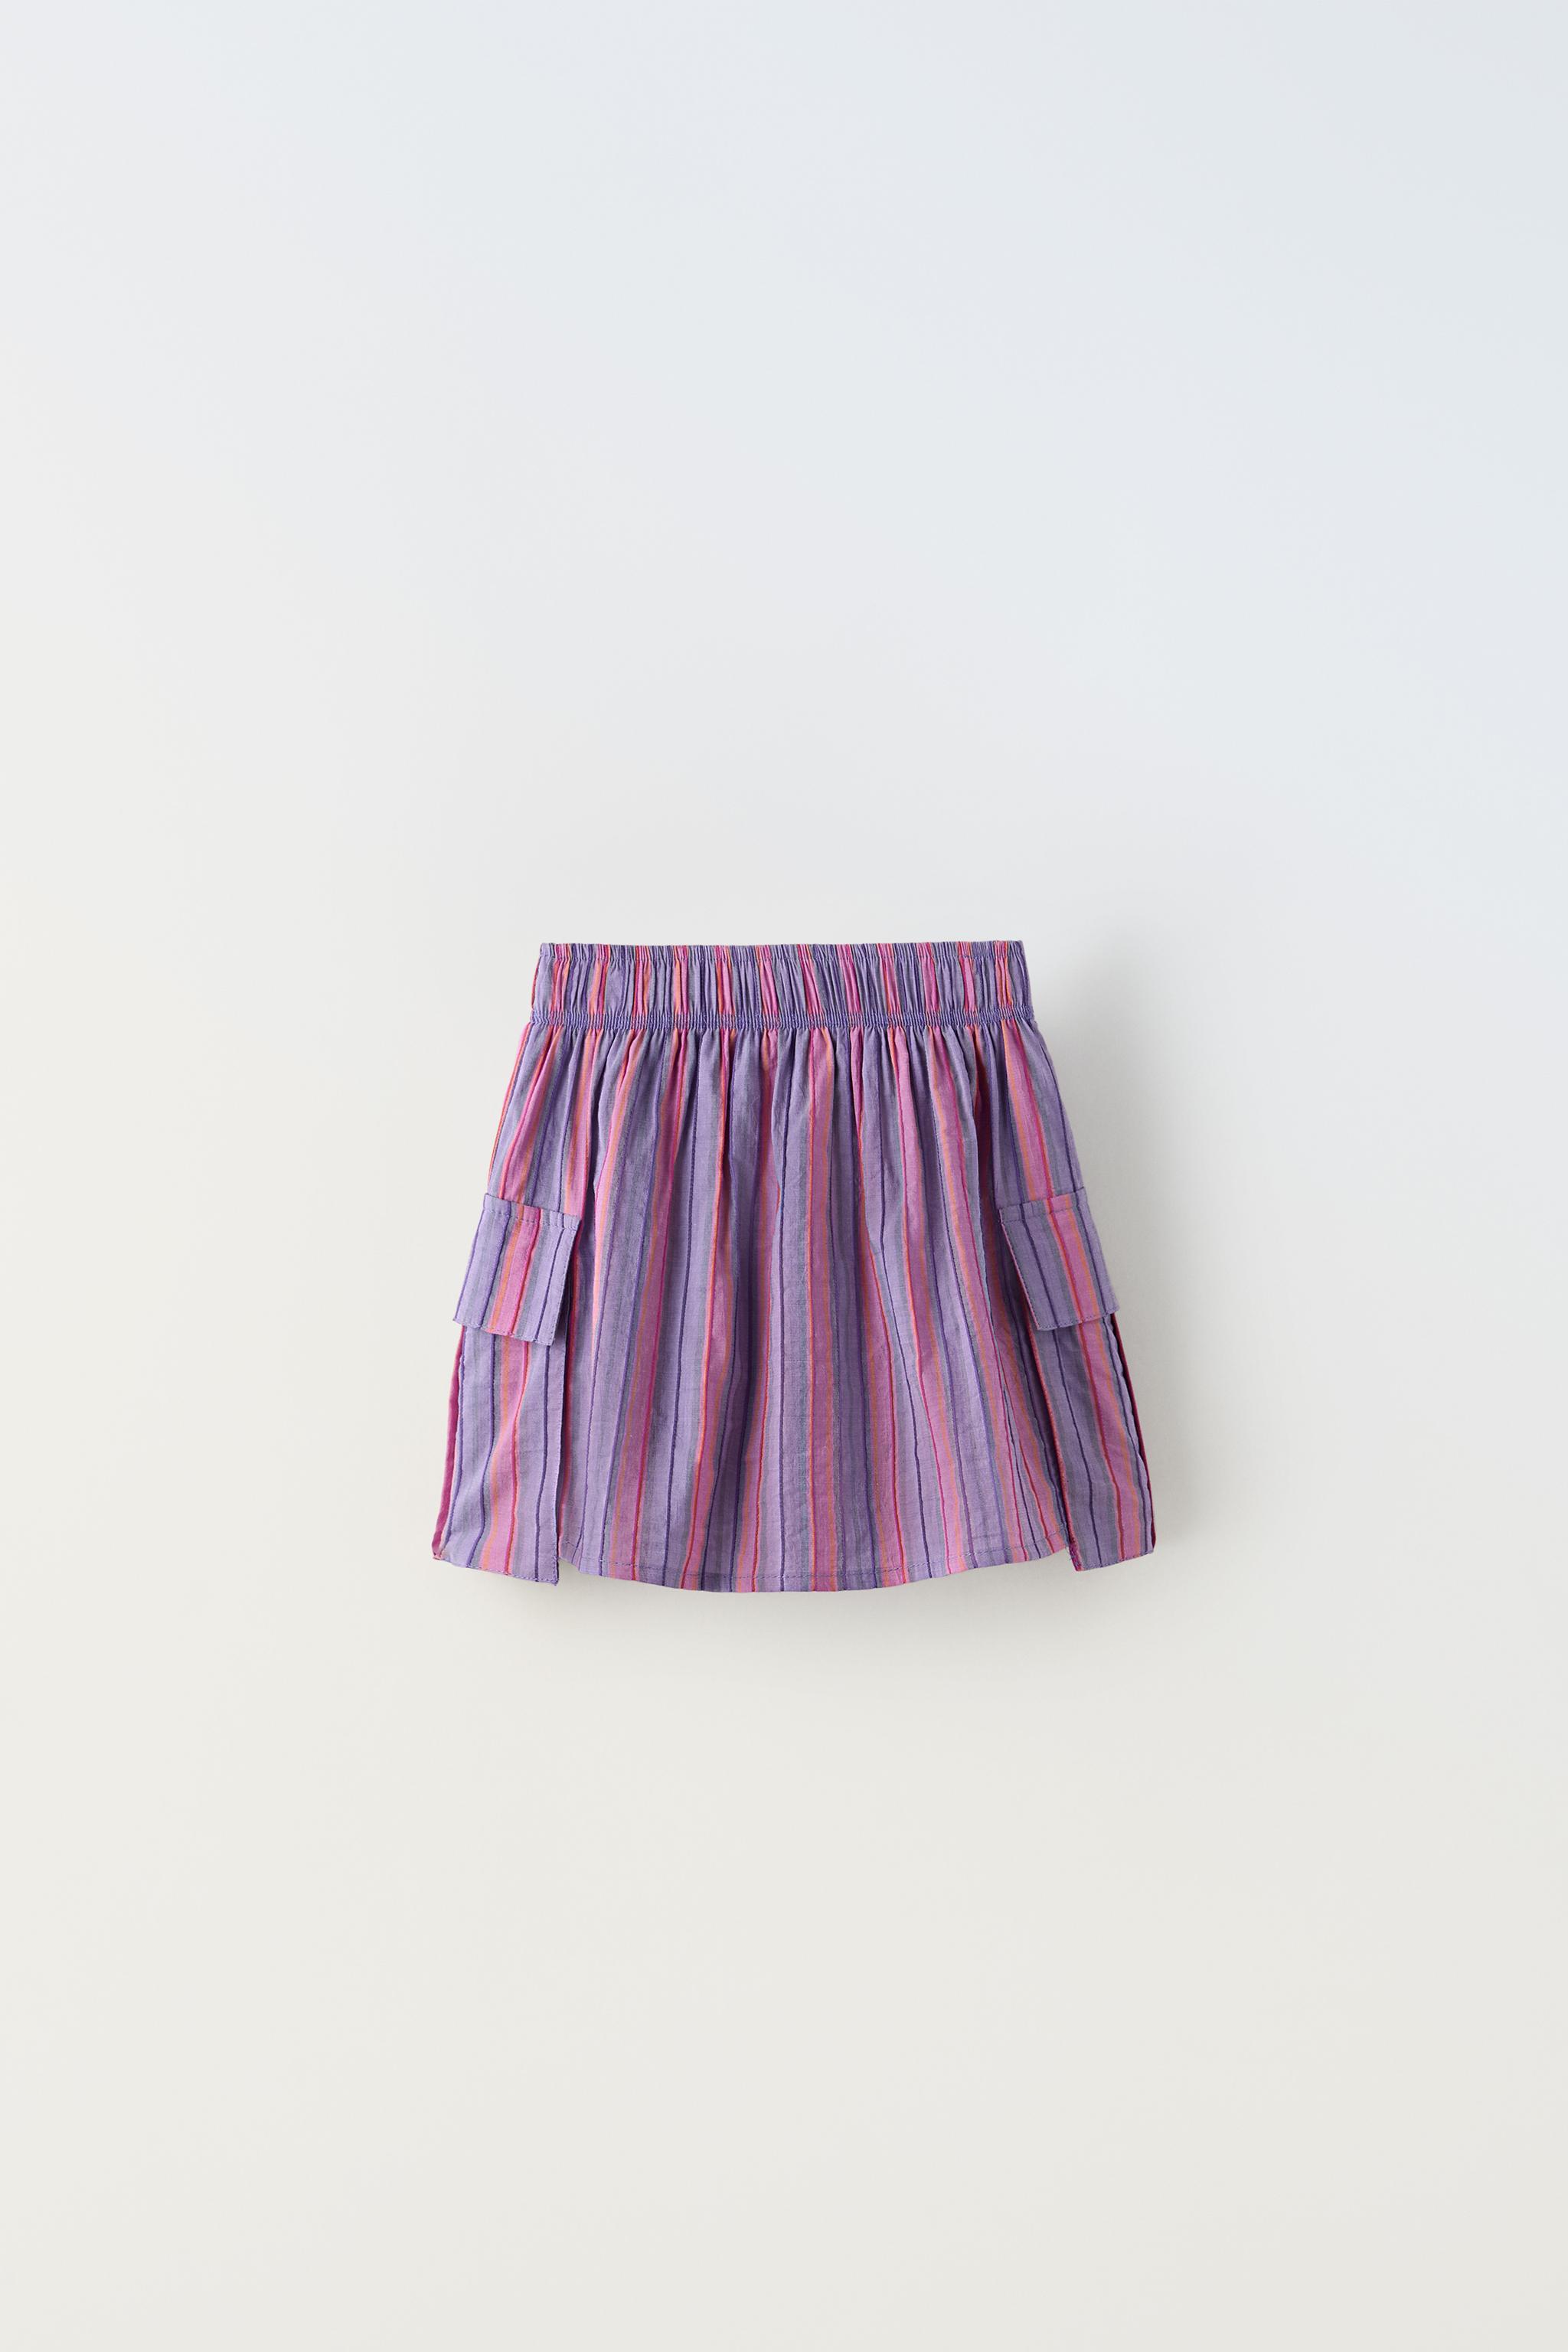 Workwear: Striped A-Line Skirt, Lady in Violet, Affordable Fashion Blog